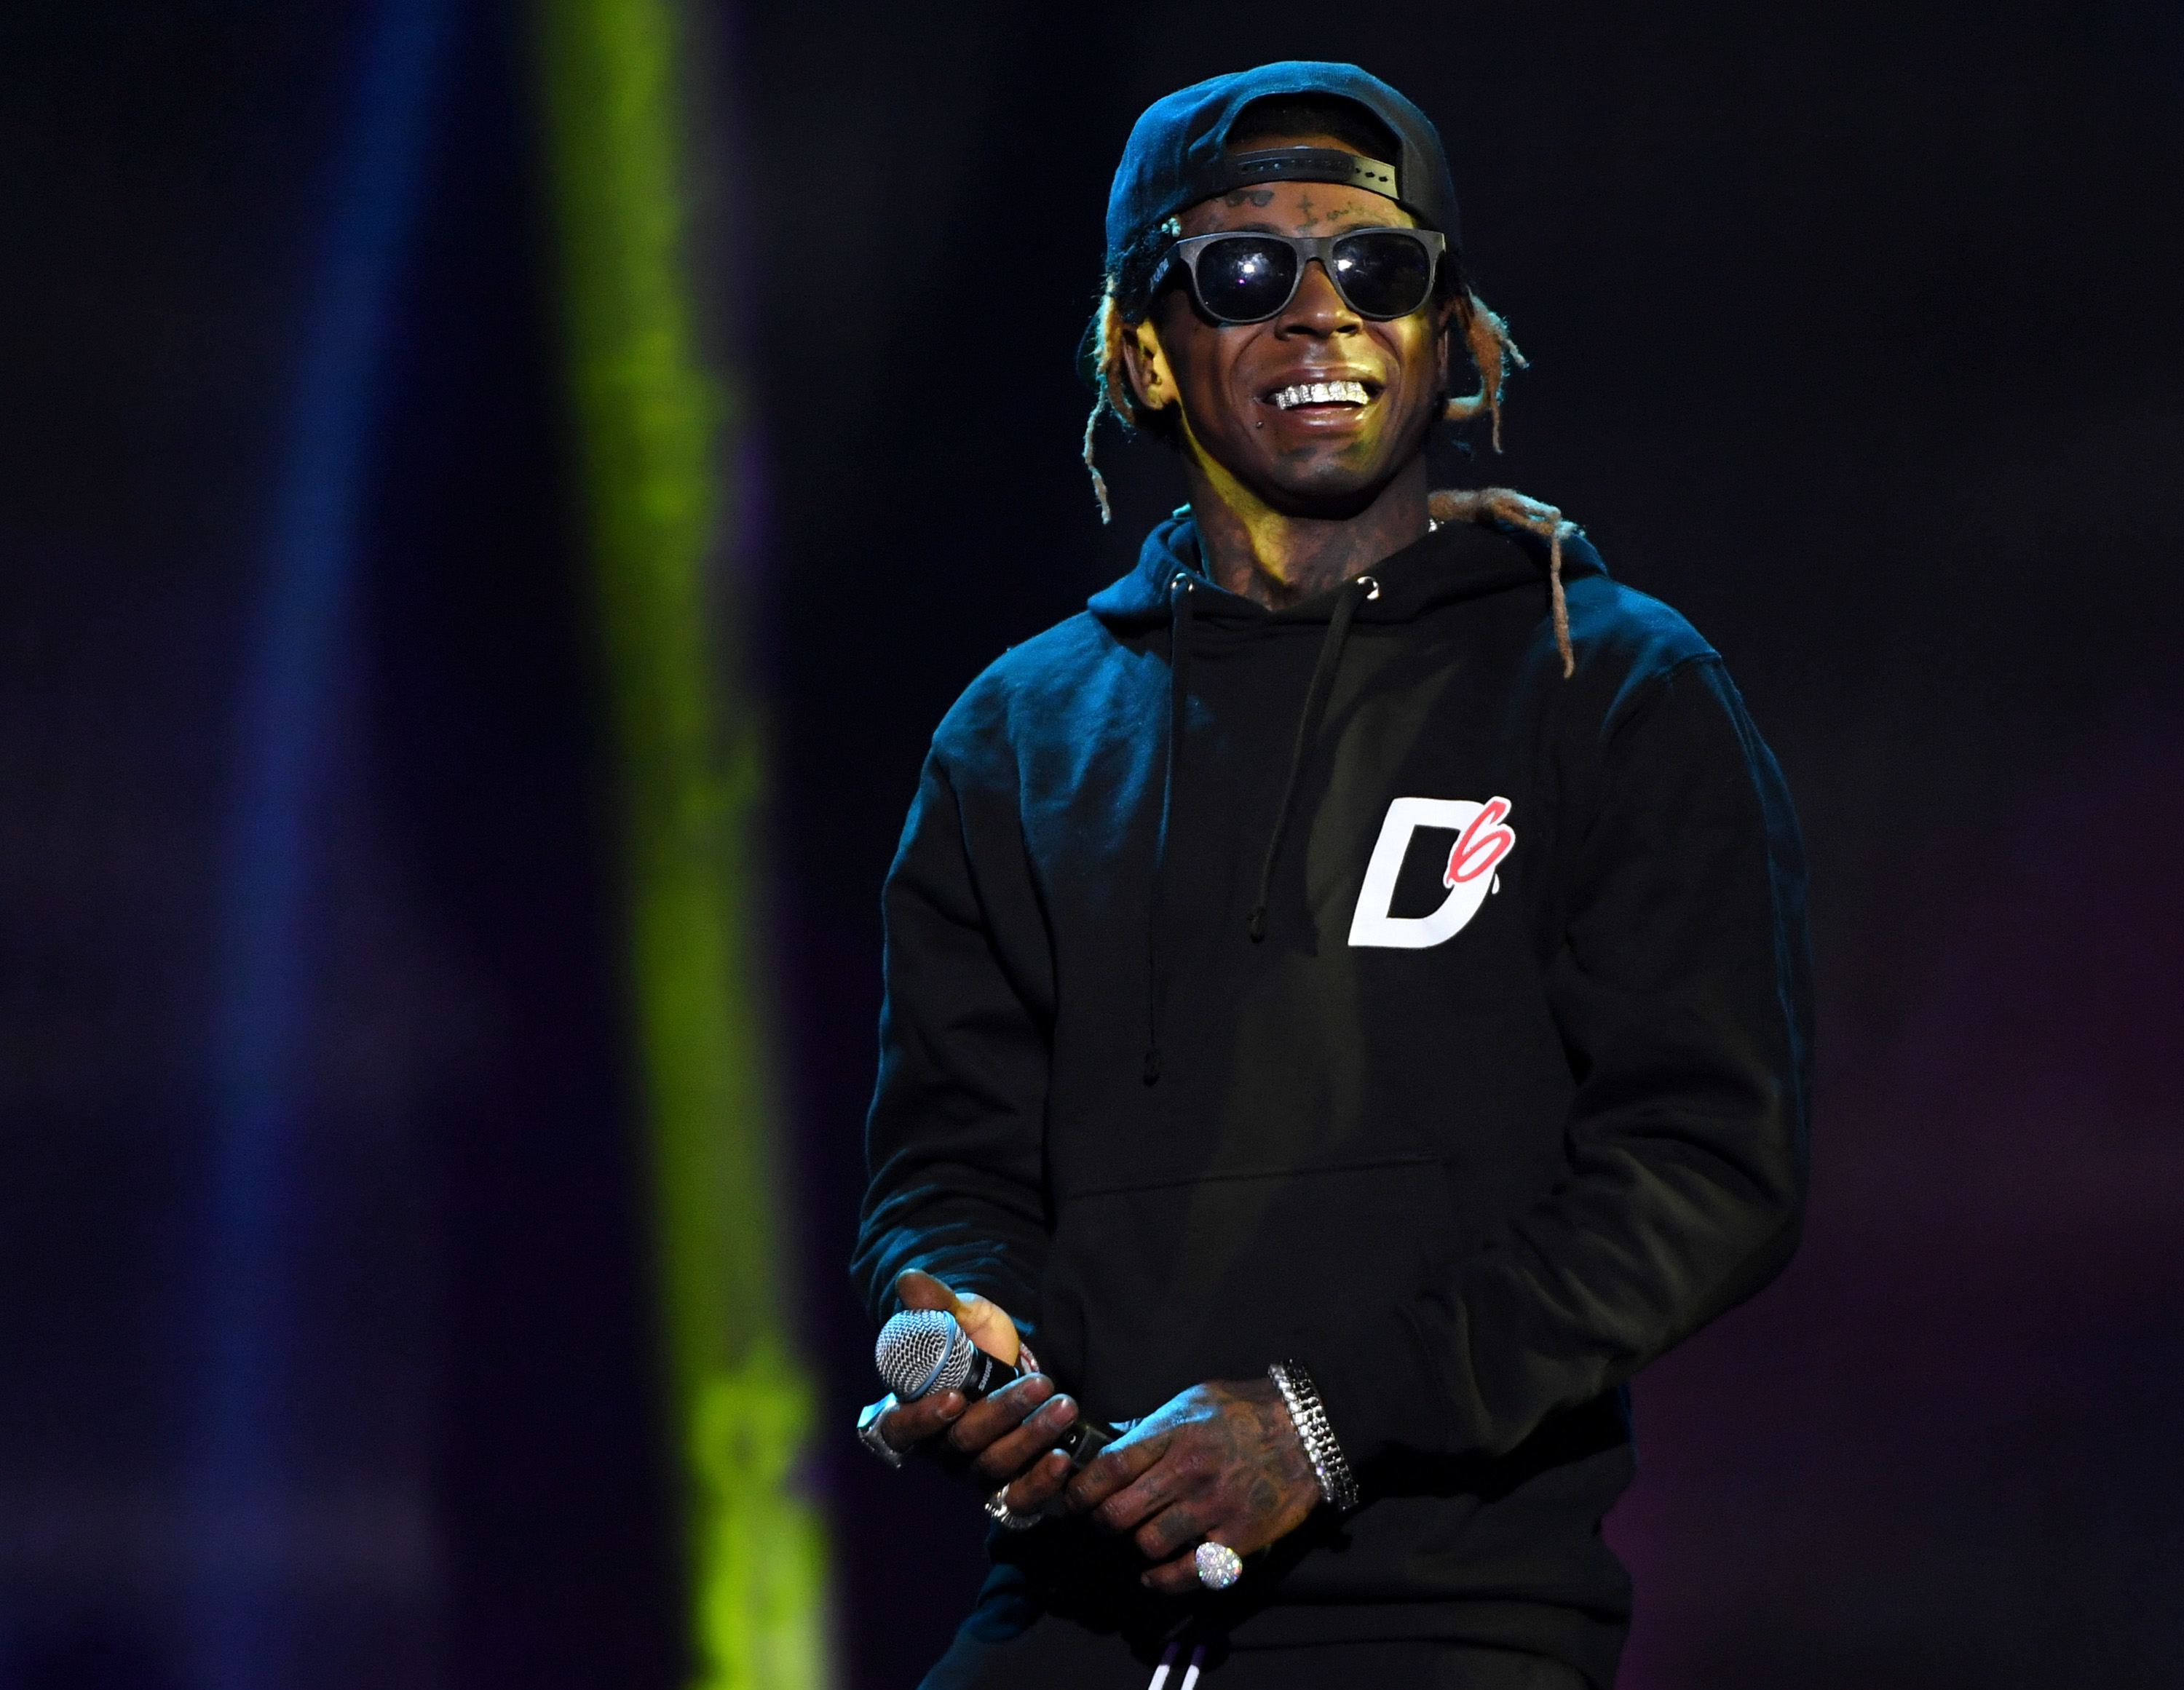 Lil Wayne Reportedly Canceled Panorama Show Because He “Didn’t Want To Do It”